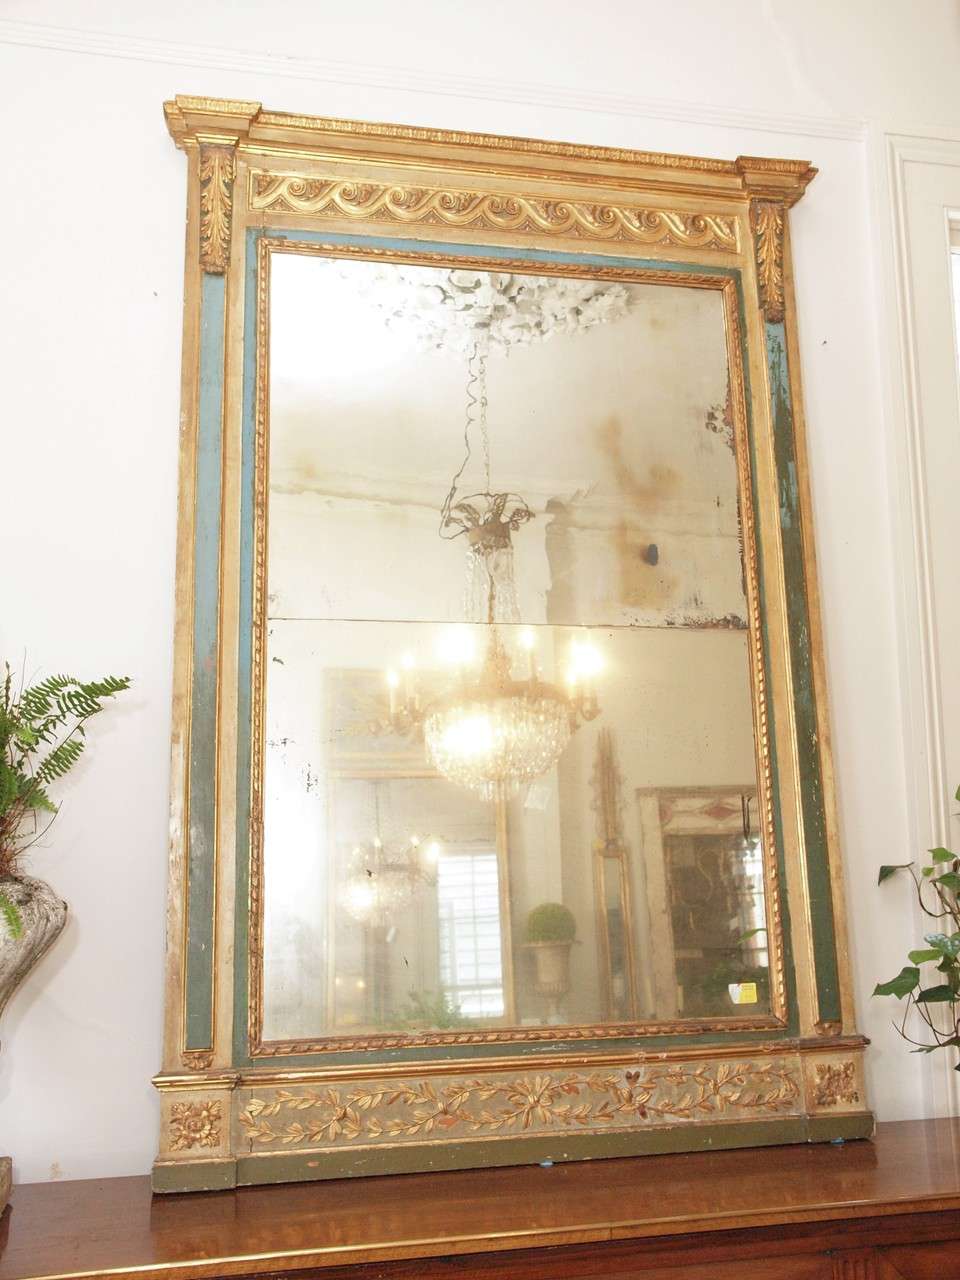 18th century Louis XVI trumeau mirror with gilt carved wood and painted in green and cream